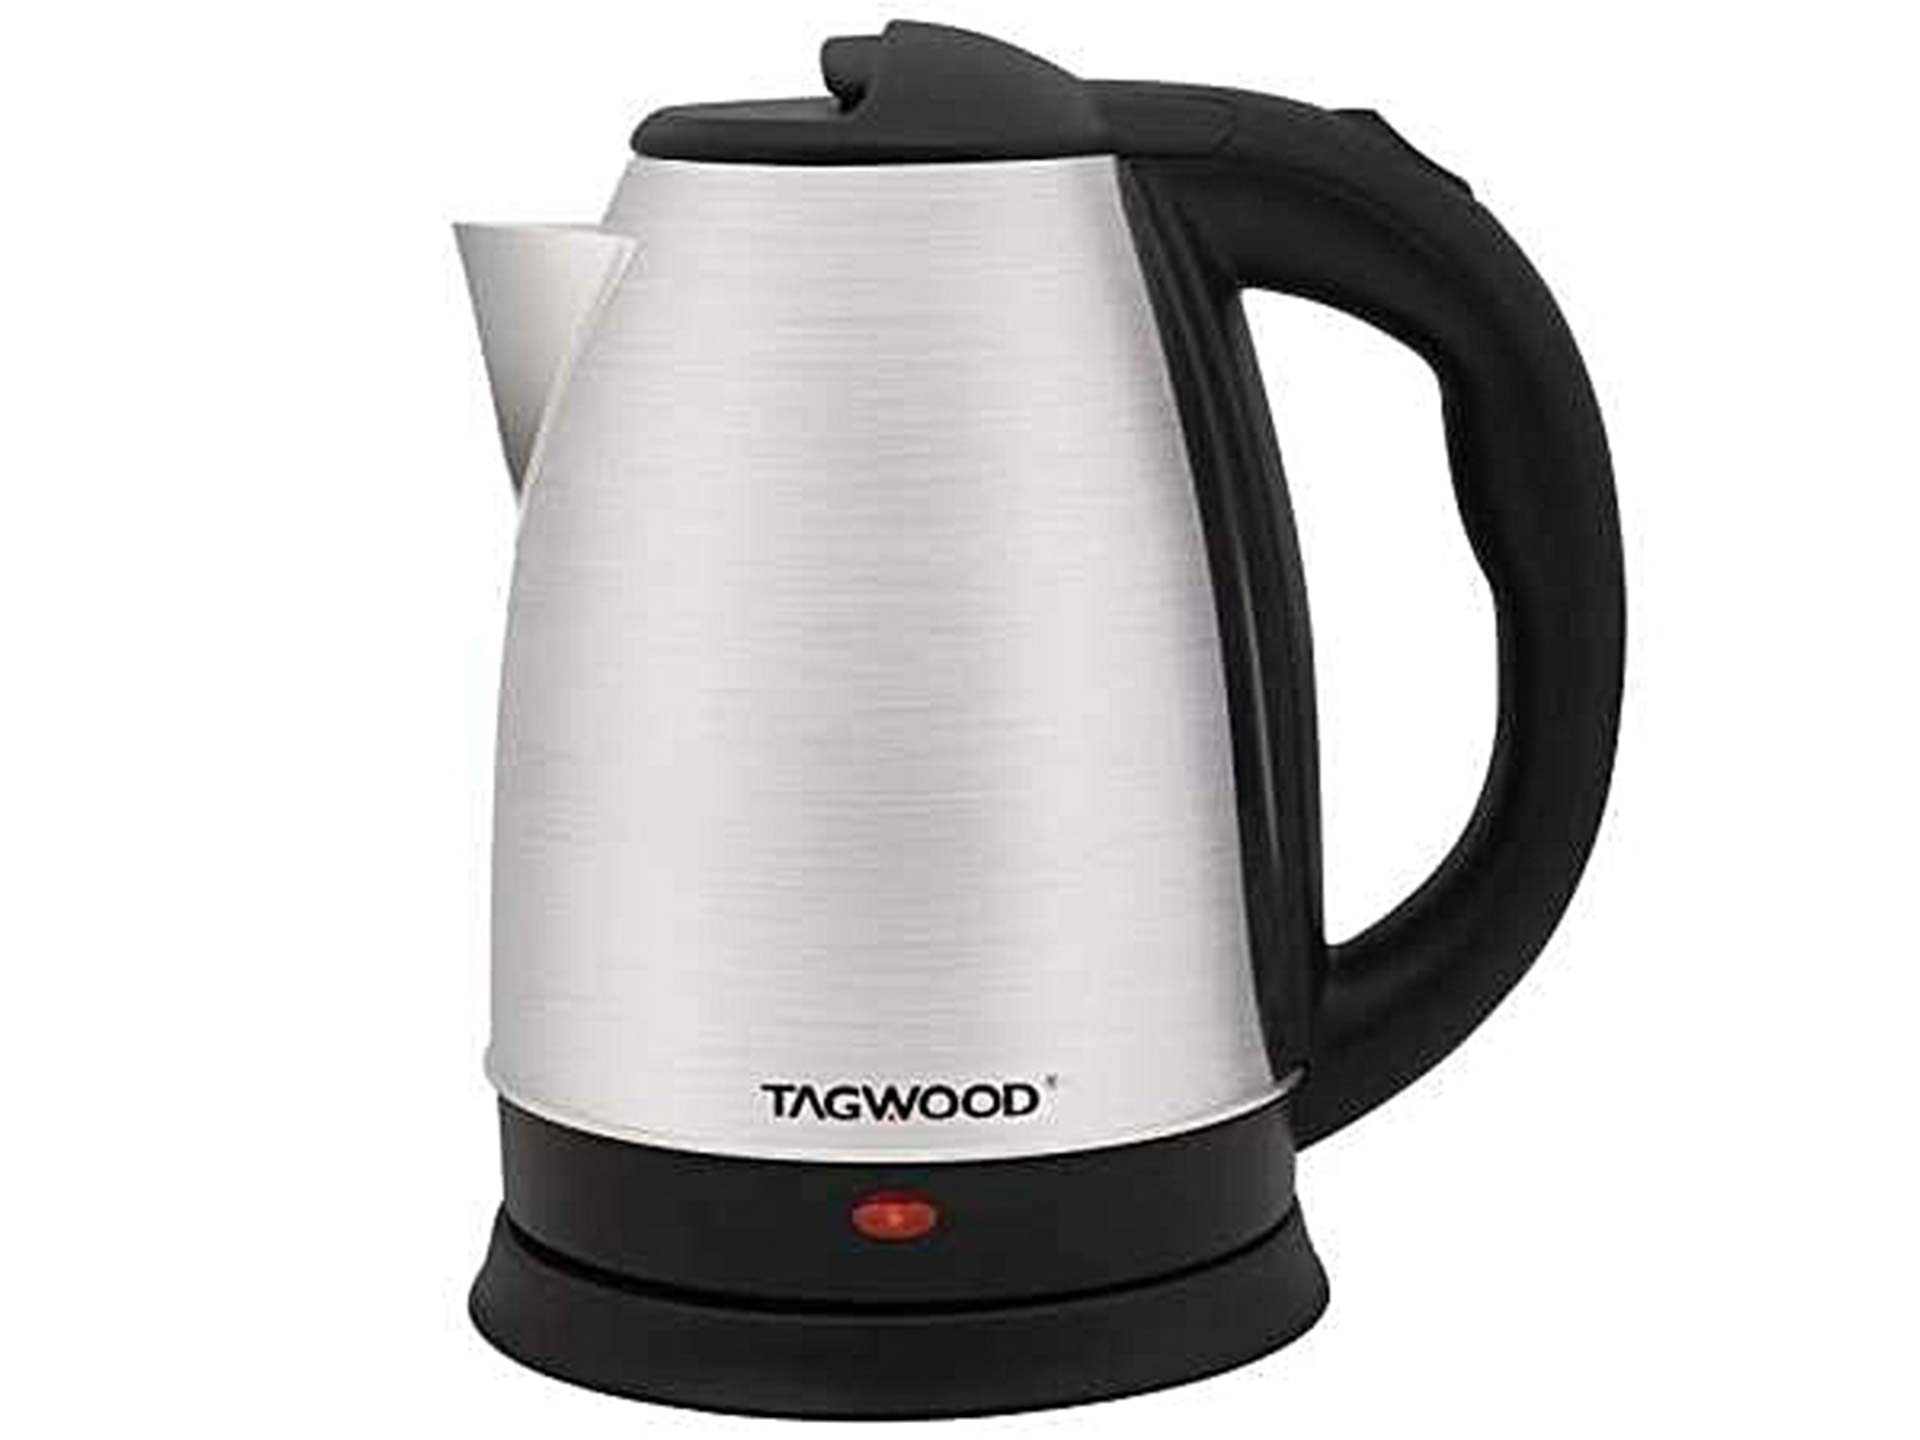 TAGWOOD TG2018 Electric Stainless 